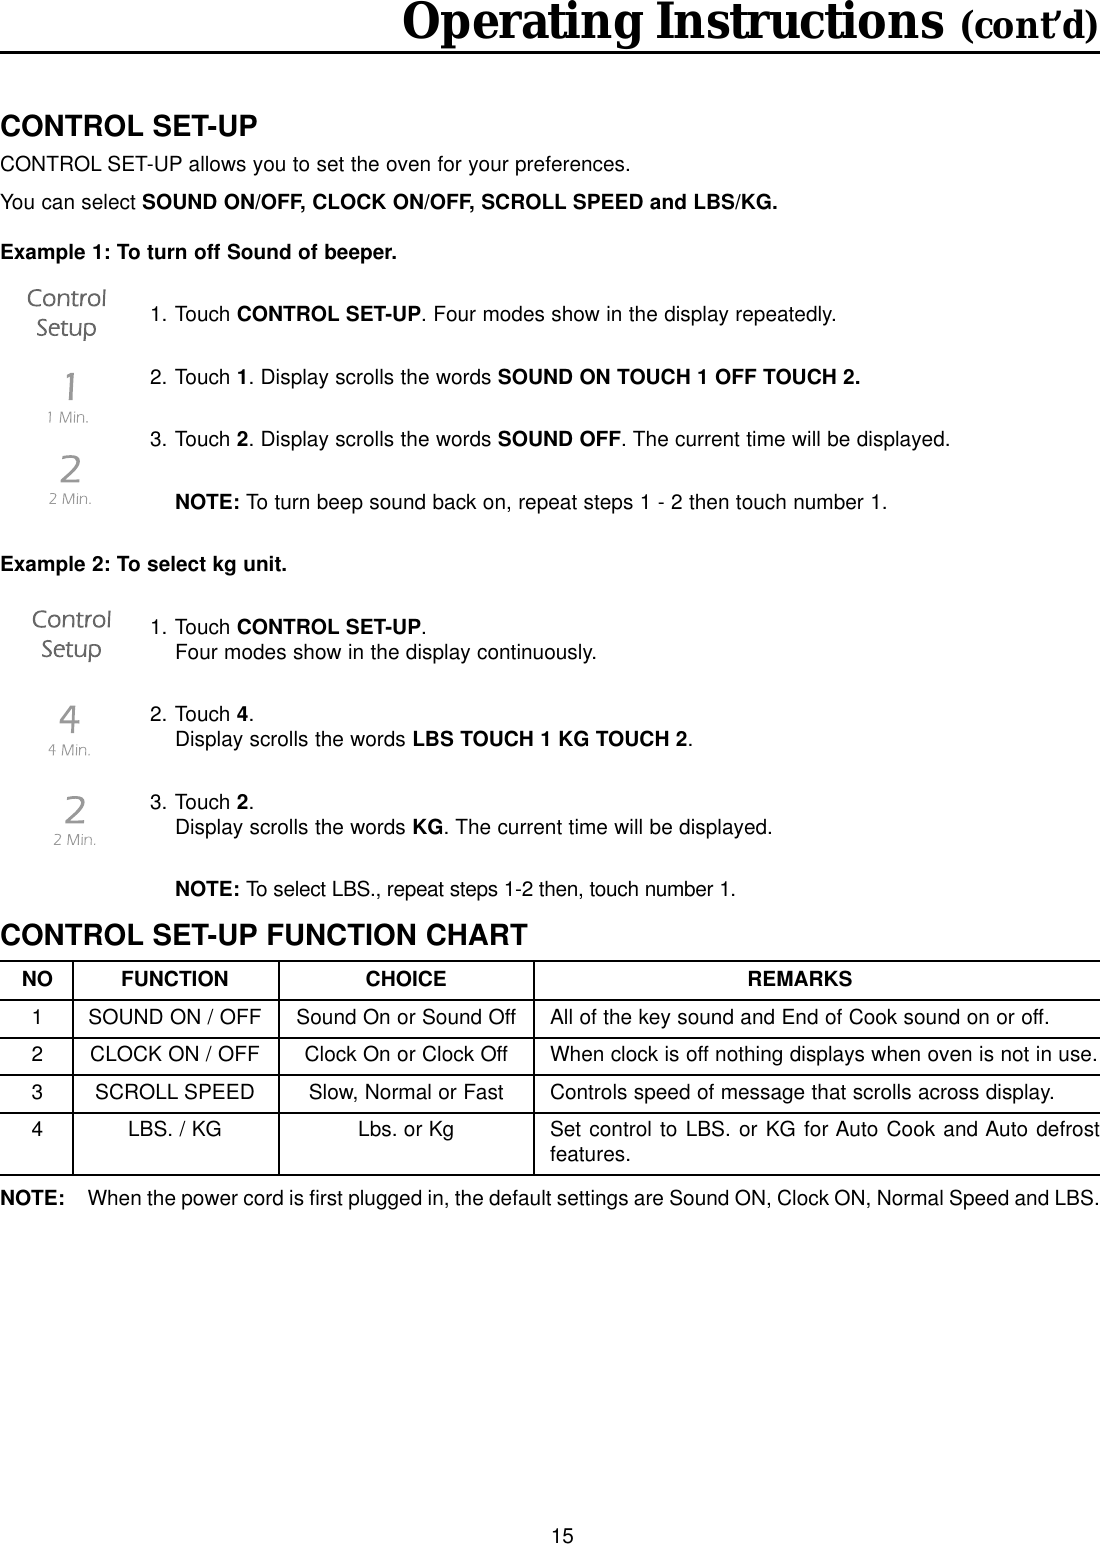 15Operating Instructions (cont’d)CONTROL SET-UP FUNCTION CHARTNO FUNCTION CHOICE REMARKS1 SOUND ON / OFF Sound On or Sound Off All of the key sound and End of Cook sound on or off.2 CLOCK ON / OFF Clock On or Clock Off When clock is off nothing displays when oven is not in use.3 SCROLL SPEED Slow, Normal or Fast Controls speed of message that scrolls across display.4 LBS. / KG Lbs. or Kg Set control to LBS. or KG for Auto Cook and Auto defrostfeatures.NOTE: When the power cord is first plugged in, the default settings are Sound ON, Clock ON, Normal Speed and LBS.CONTROL SET-UPCONTROL SET-UP allows you to set the oven for your preferences.You can select SOUND ON/OFF, CLOCK ON/OFF, SCROLL SPEED and LBS/KG.Example 1: To turn off Sound of beeper.1. Touch CONTROL SET-UP. Four modes show in the display repeatedly.2. Touch 1. Display scrolls the words SOUND ON TOUCH 1 OFF TOUCH 2.3. Touch 2. Display scrolls the words SOUND OFF. The current time will be displayed.NOTE: To turn beep sound back on, repeat steps 1 - 2 then touch number 1.Example 2: To select kg unit.1. Touch CONTROL SET-UP. Four modes show in the display continuously.2. Touch 4.Display scrolls the words LBS TOUCH 1 KG TOUCH 2.3. Touch 2.Display scrolls the words KG. The current time will be displayed.NOTE: To select LBS., repeat steps 1-2 then, touch number 1.